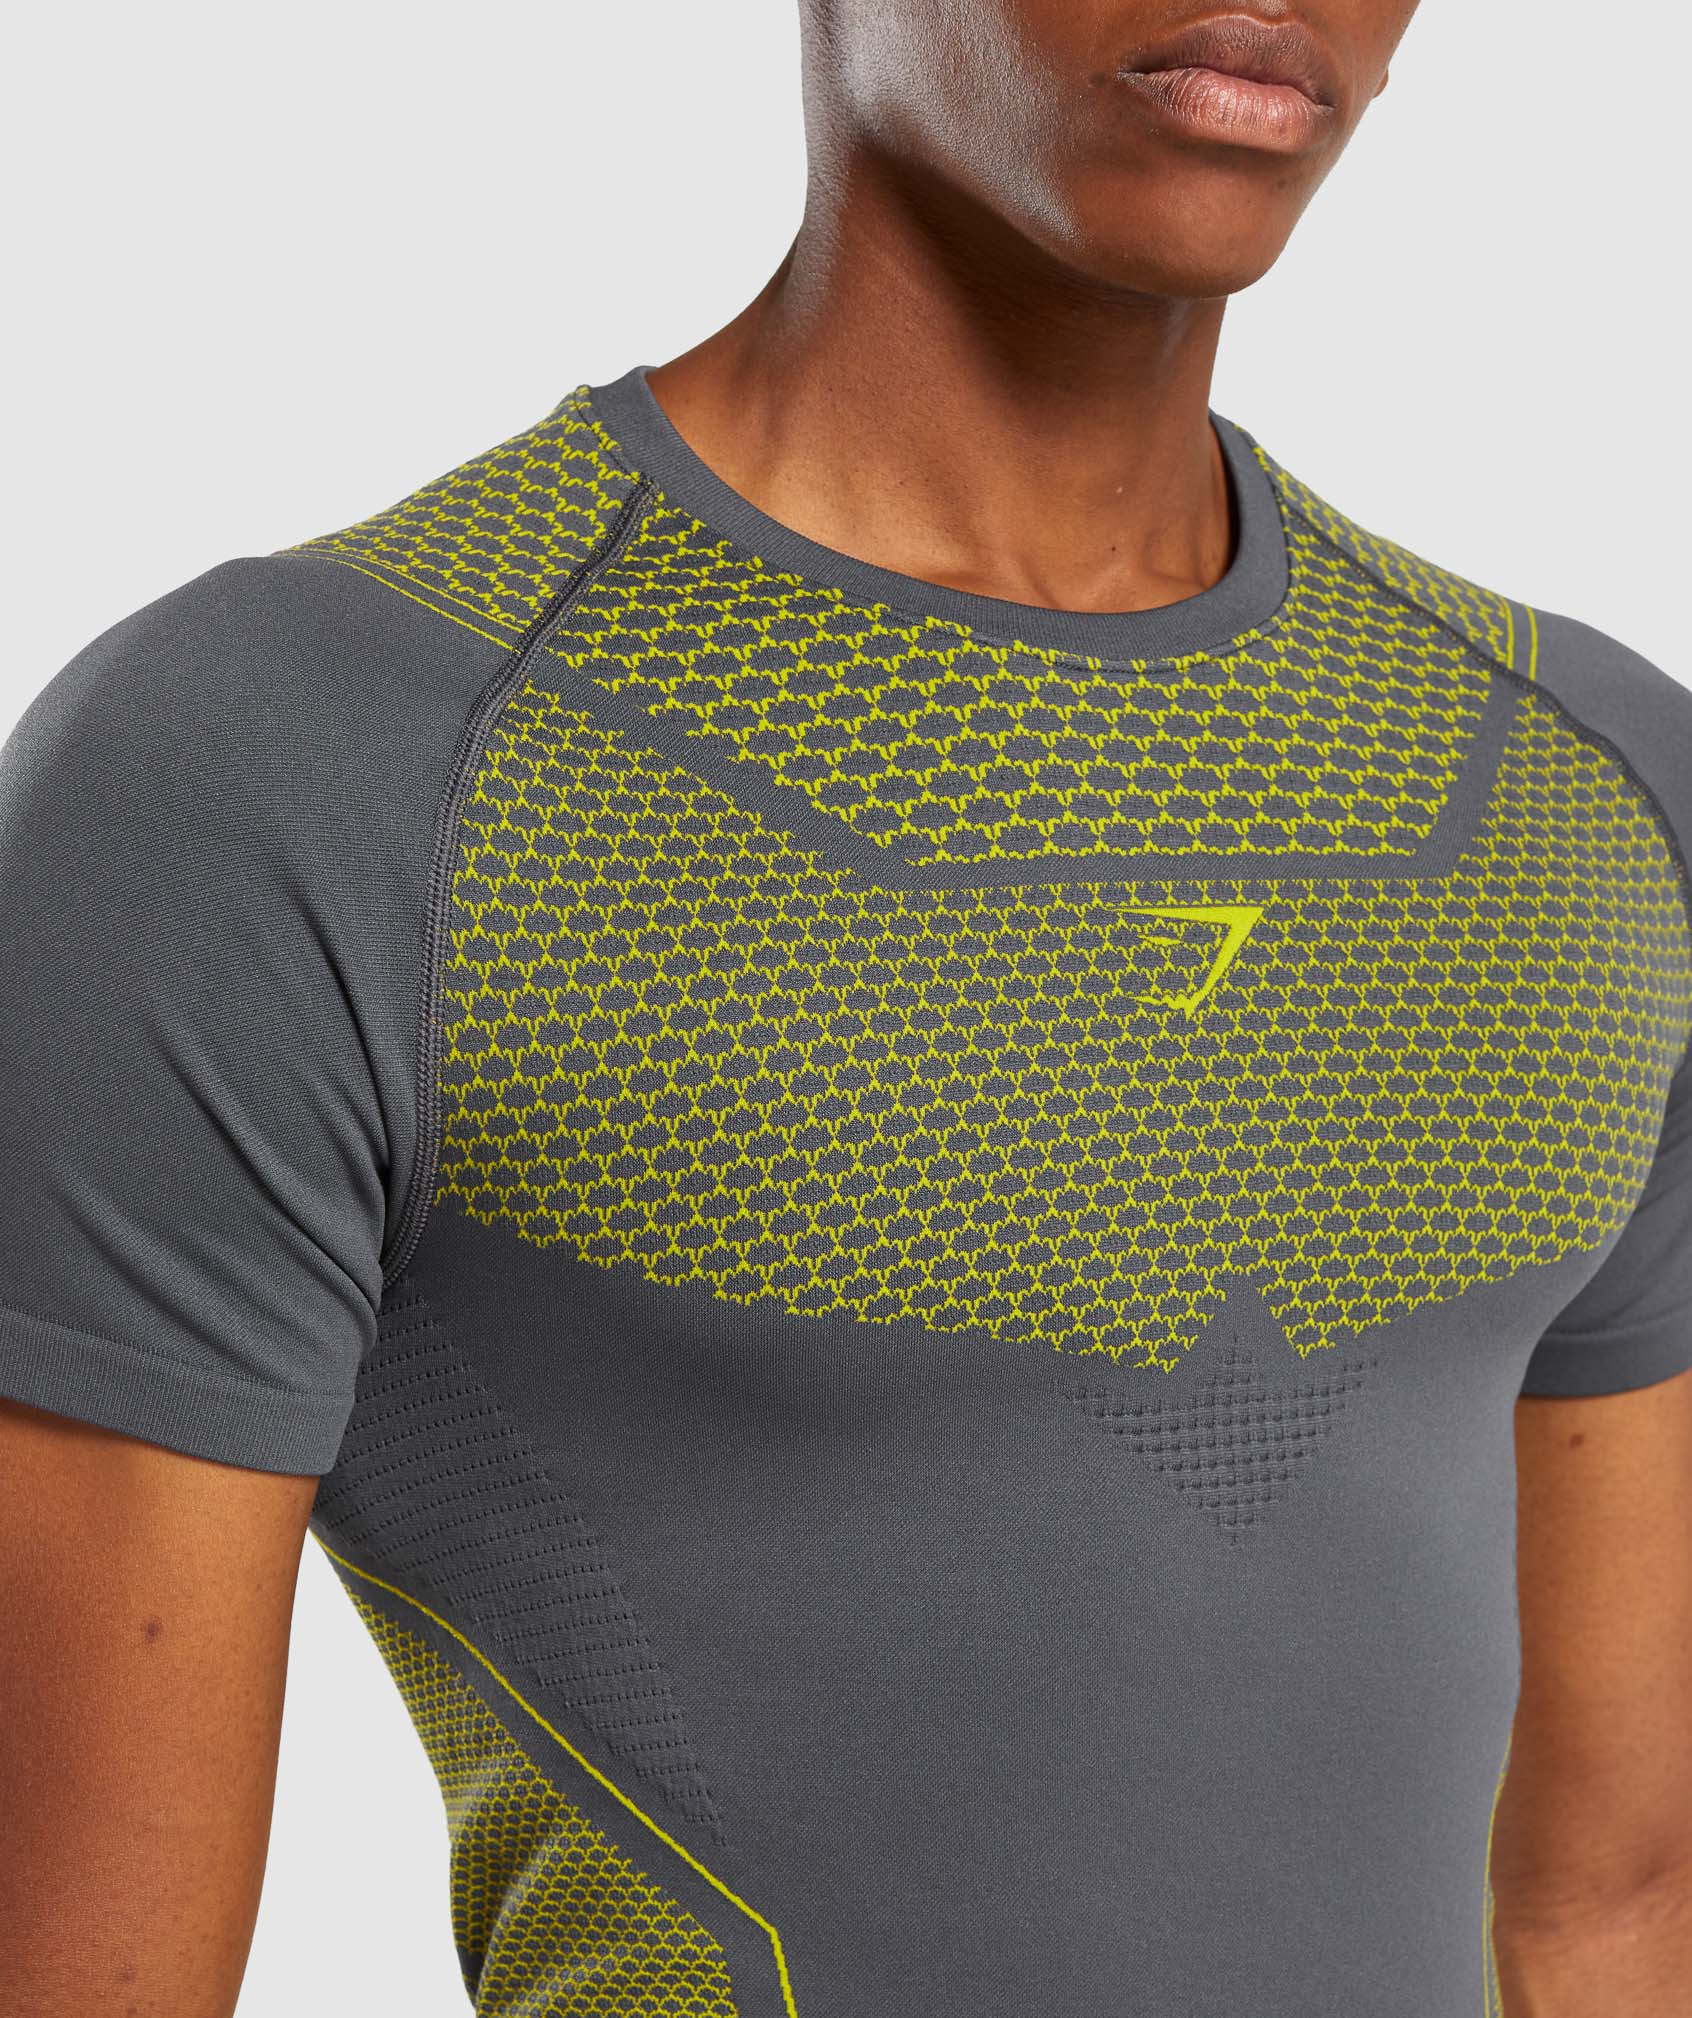 Onyx T-Shirt in Charcoal/Lime